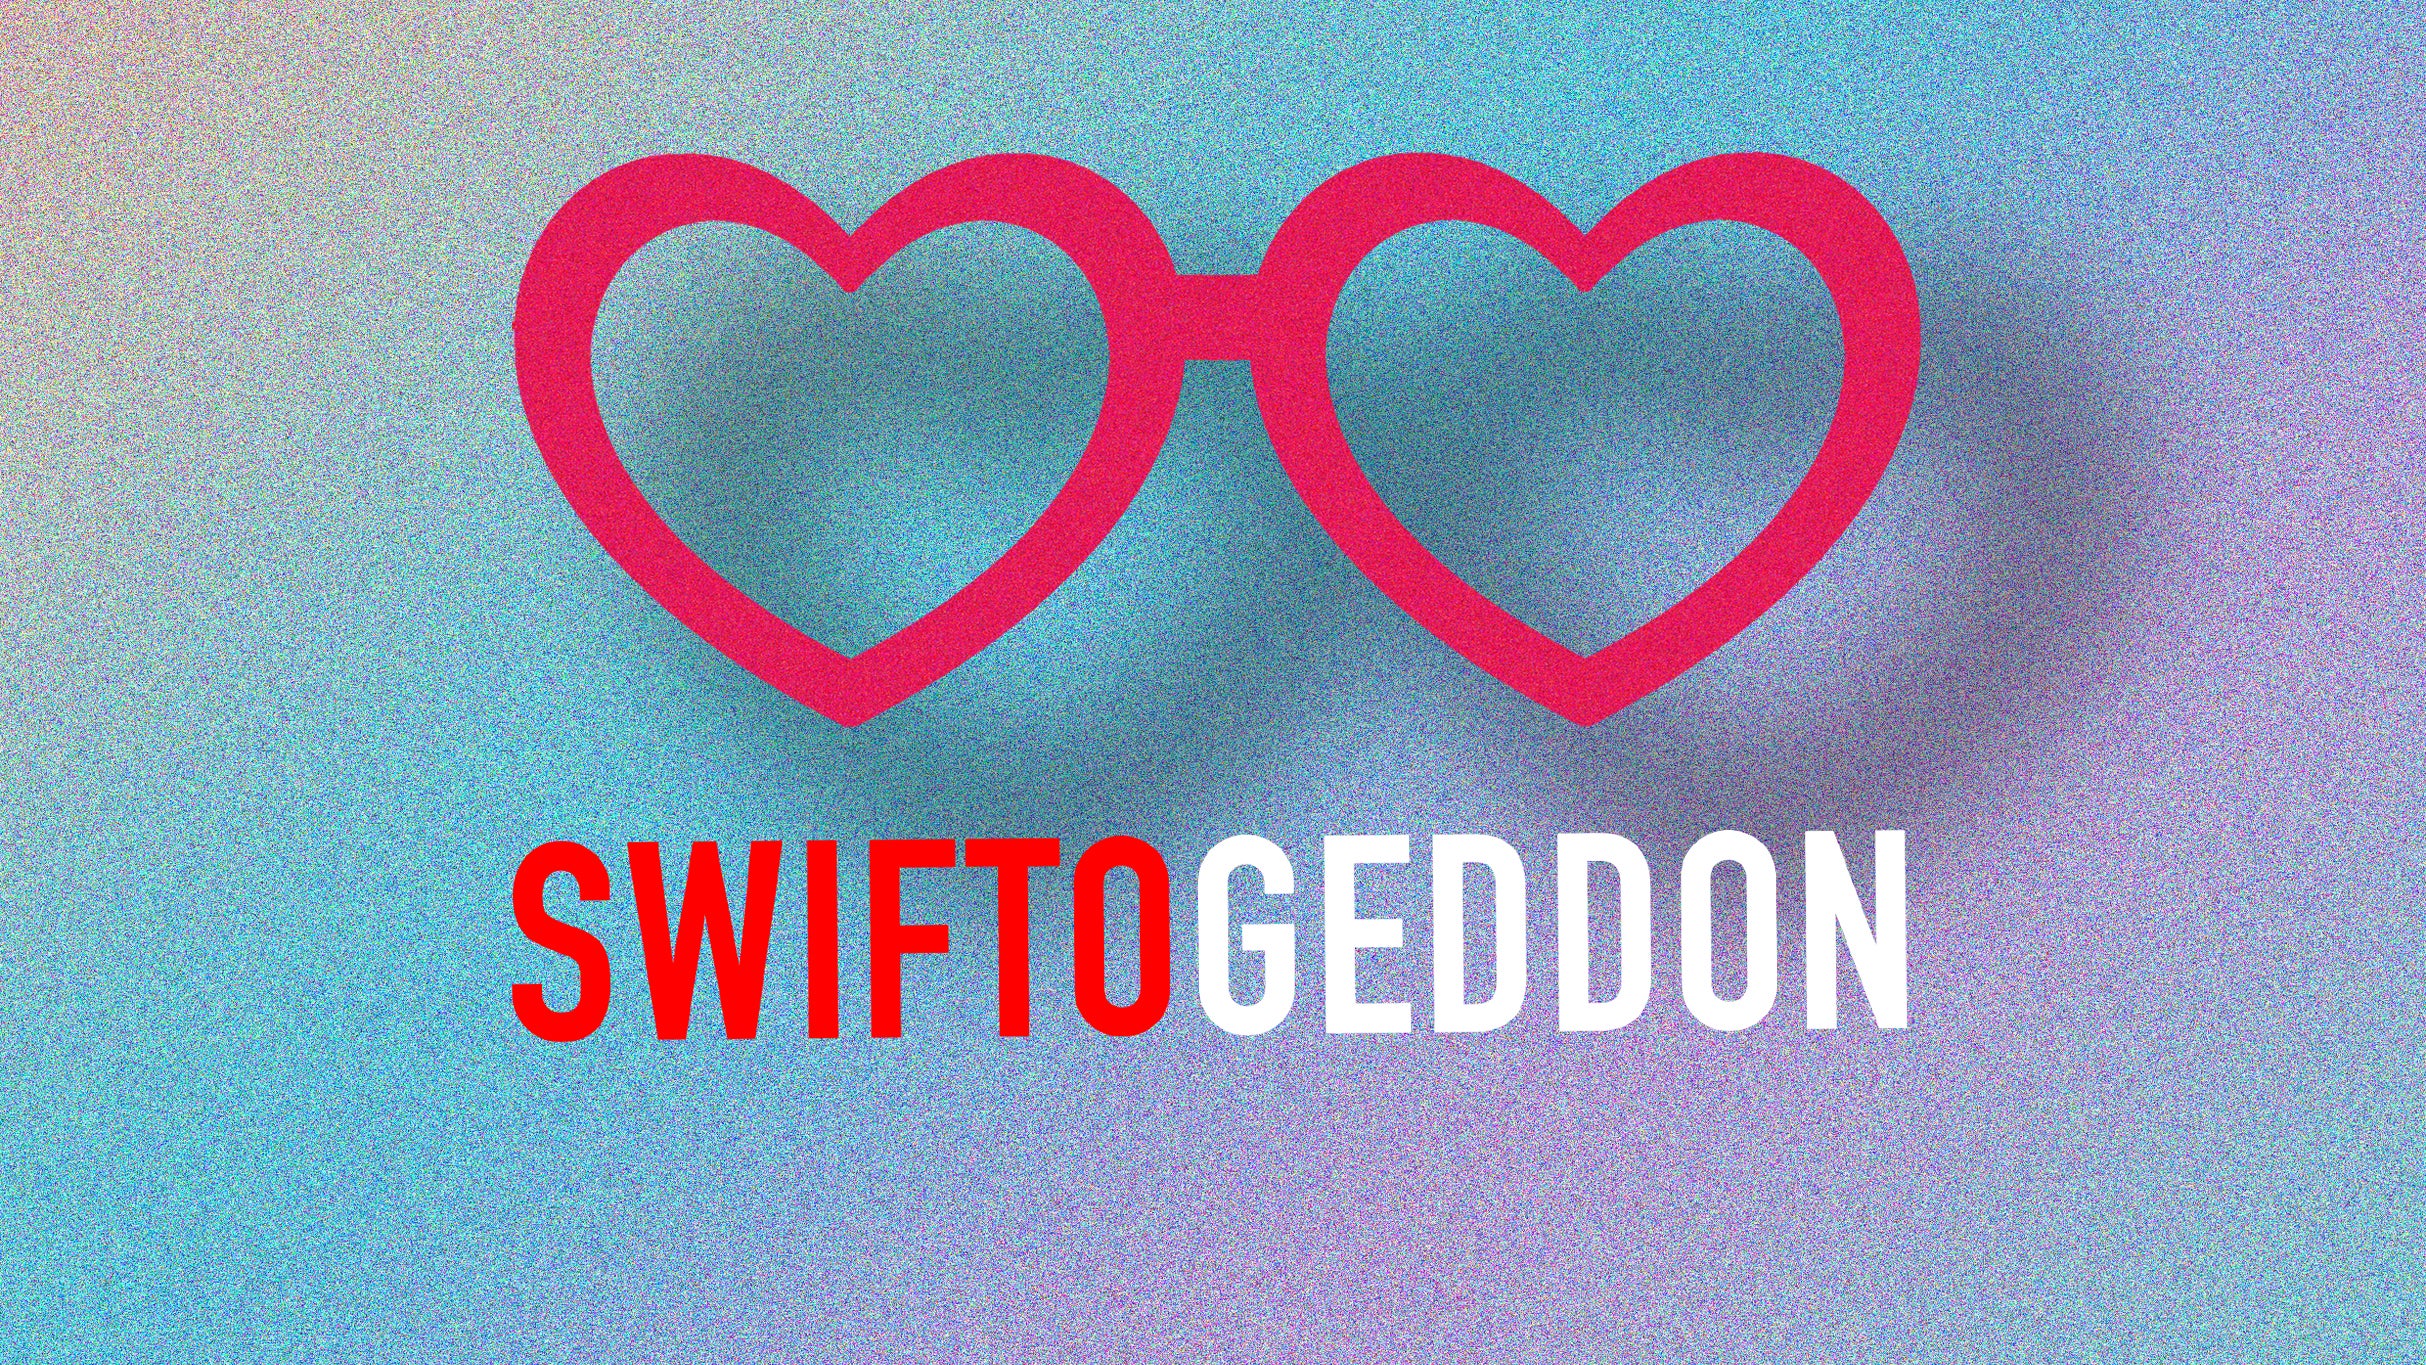 Swiftogeddon -  The Taylor Swift Club Night - Stoke-on-Trent Event Title Pic